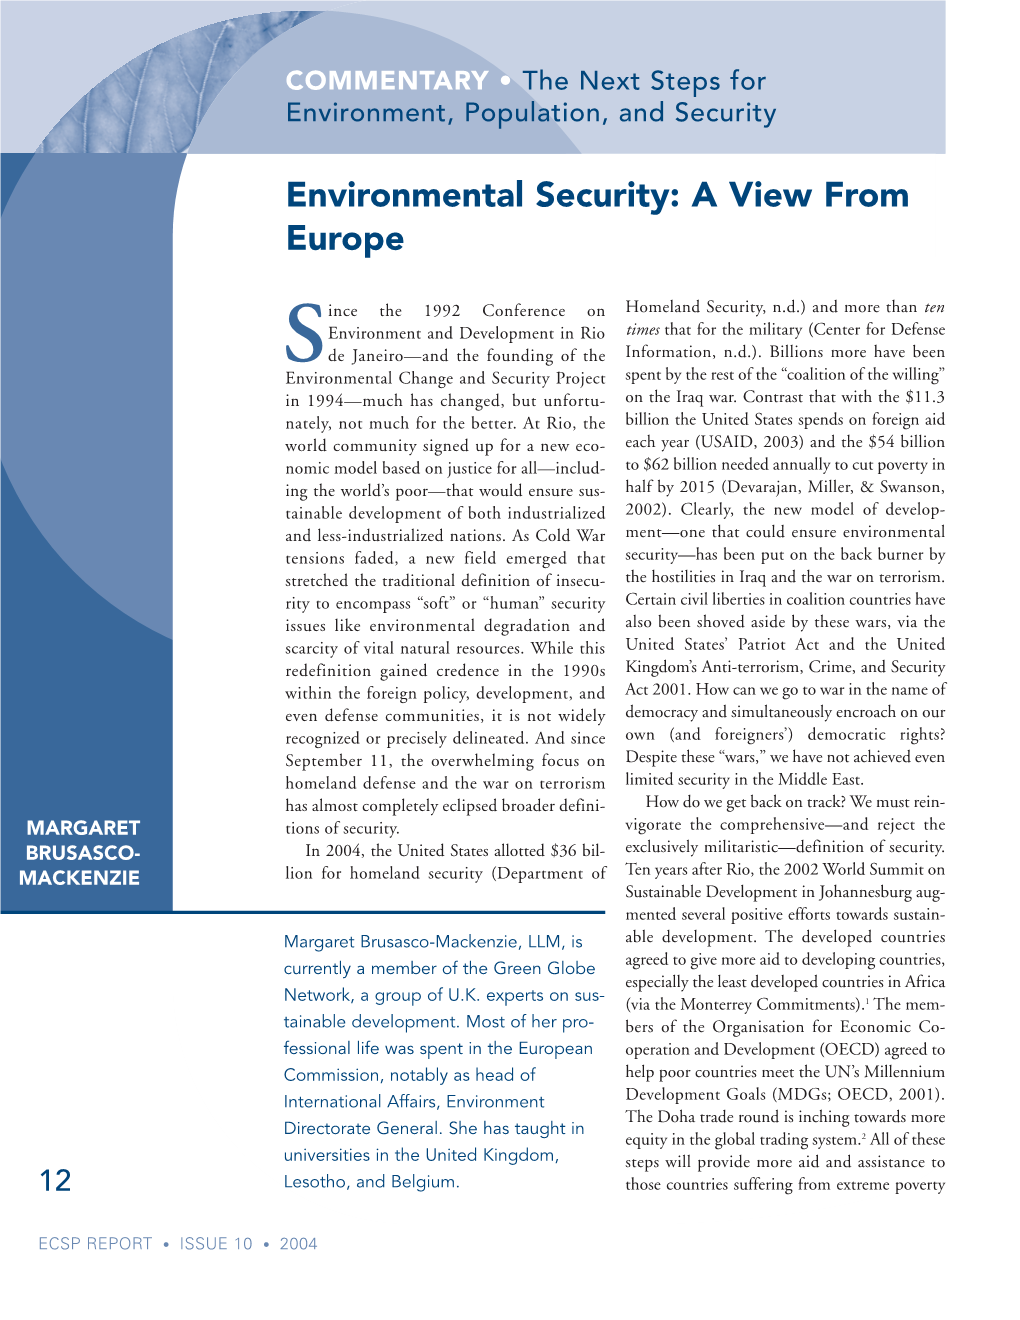 Environmental Security: a View from Europe